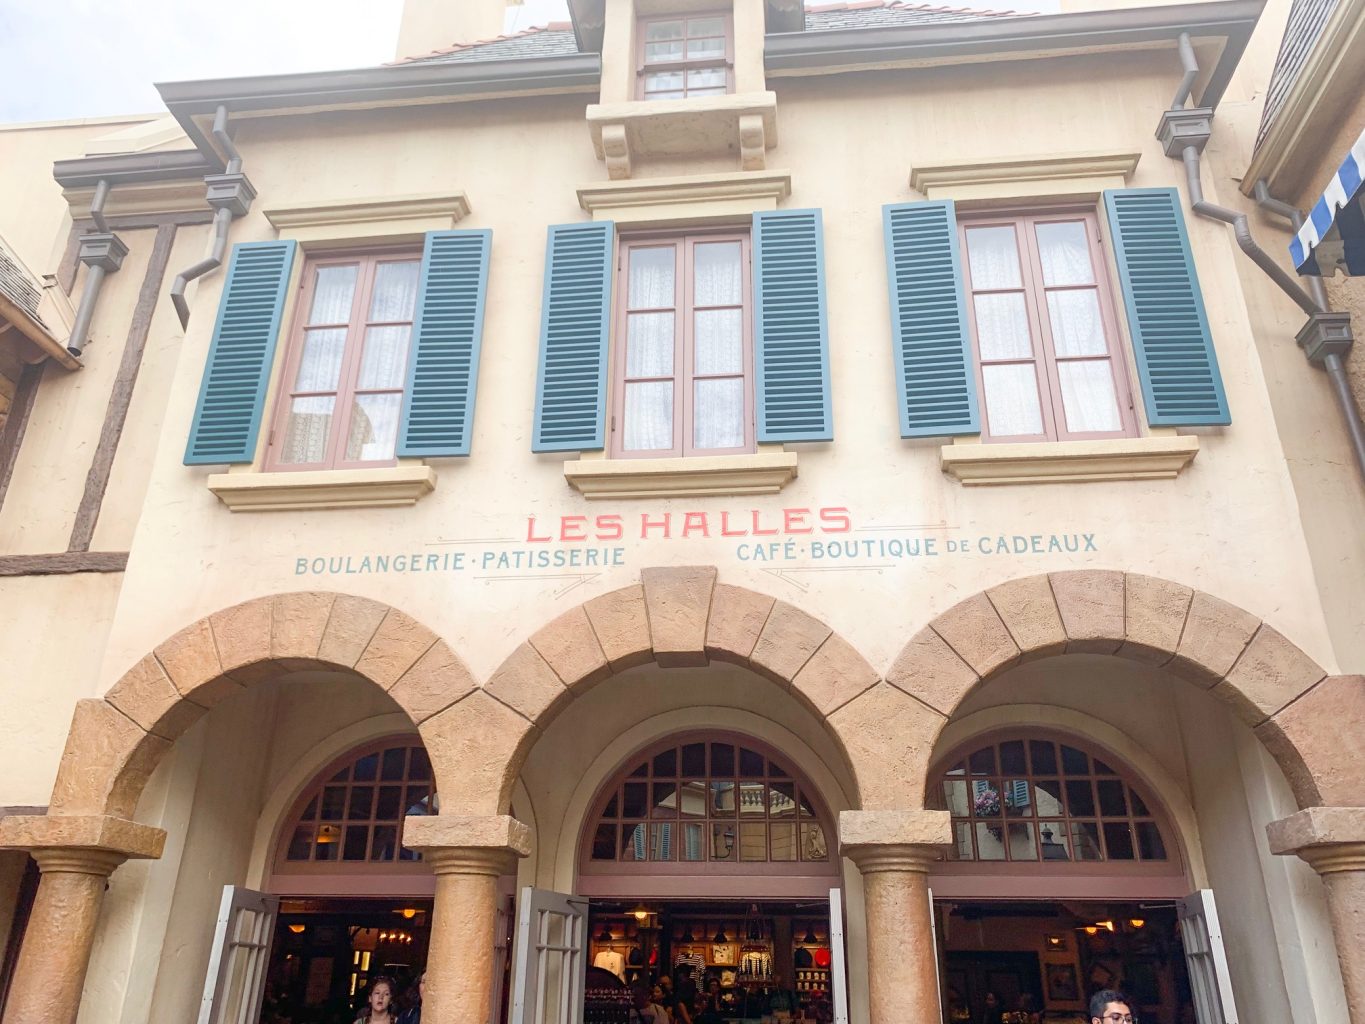 entrance to les halles bakery in the france pavilion at epcot